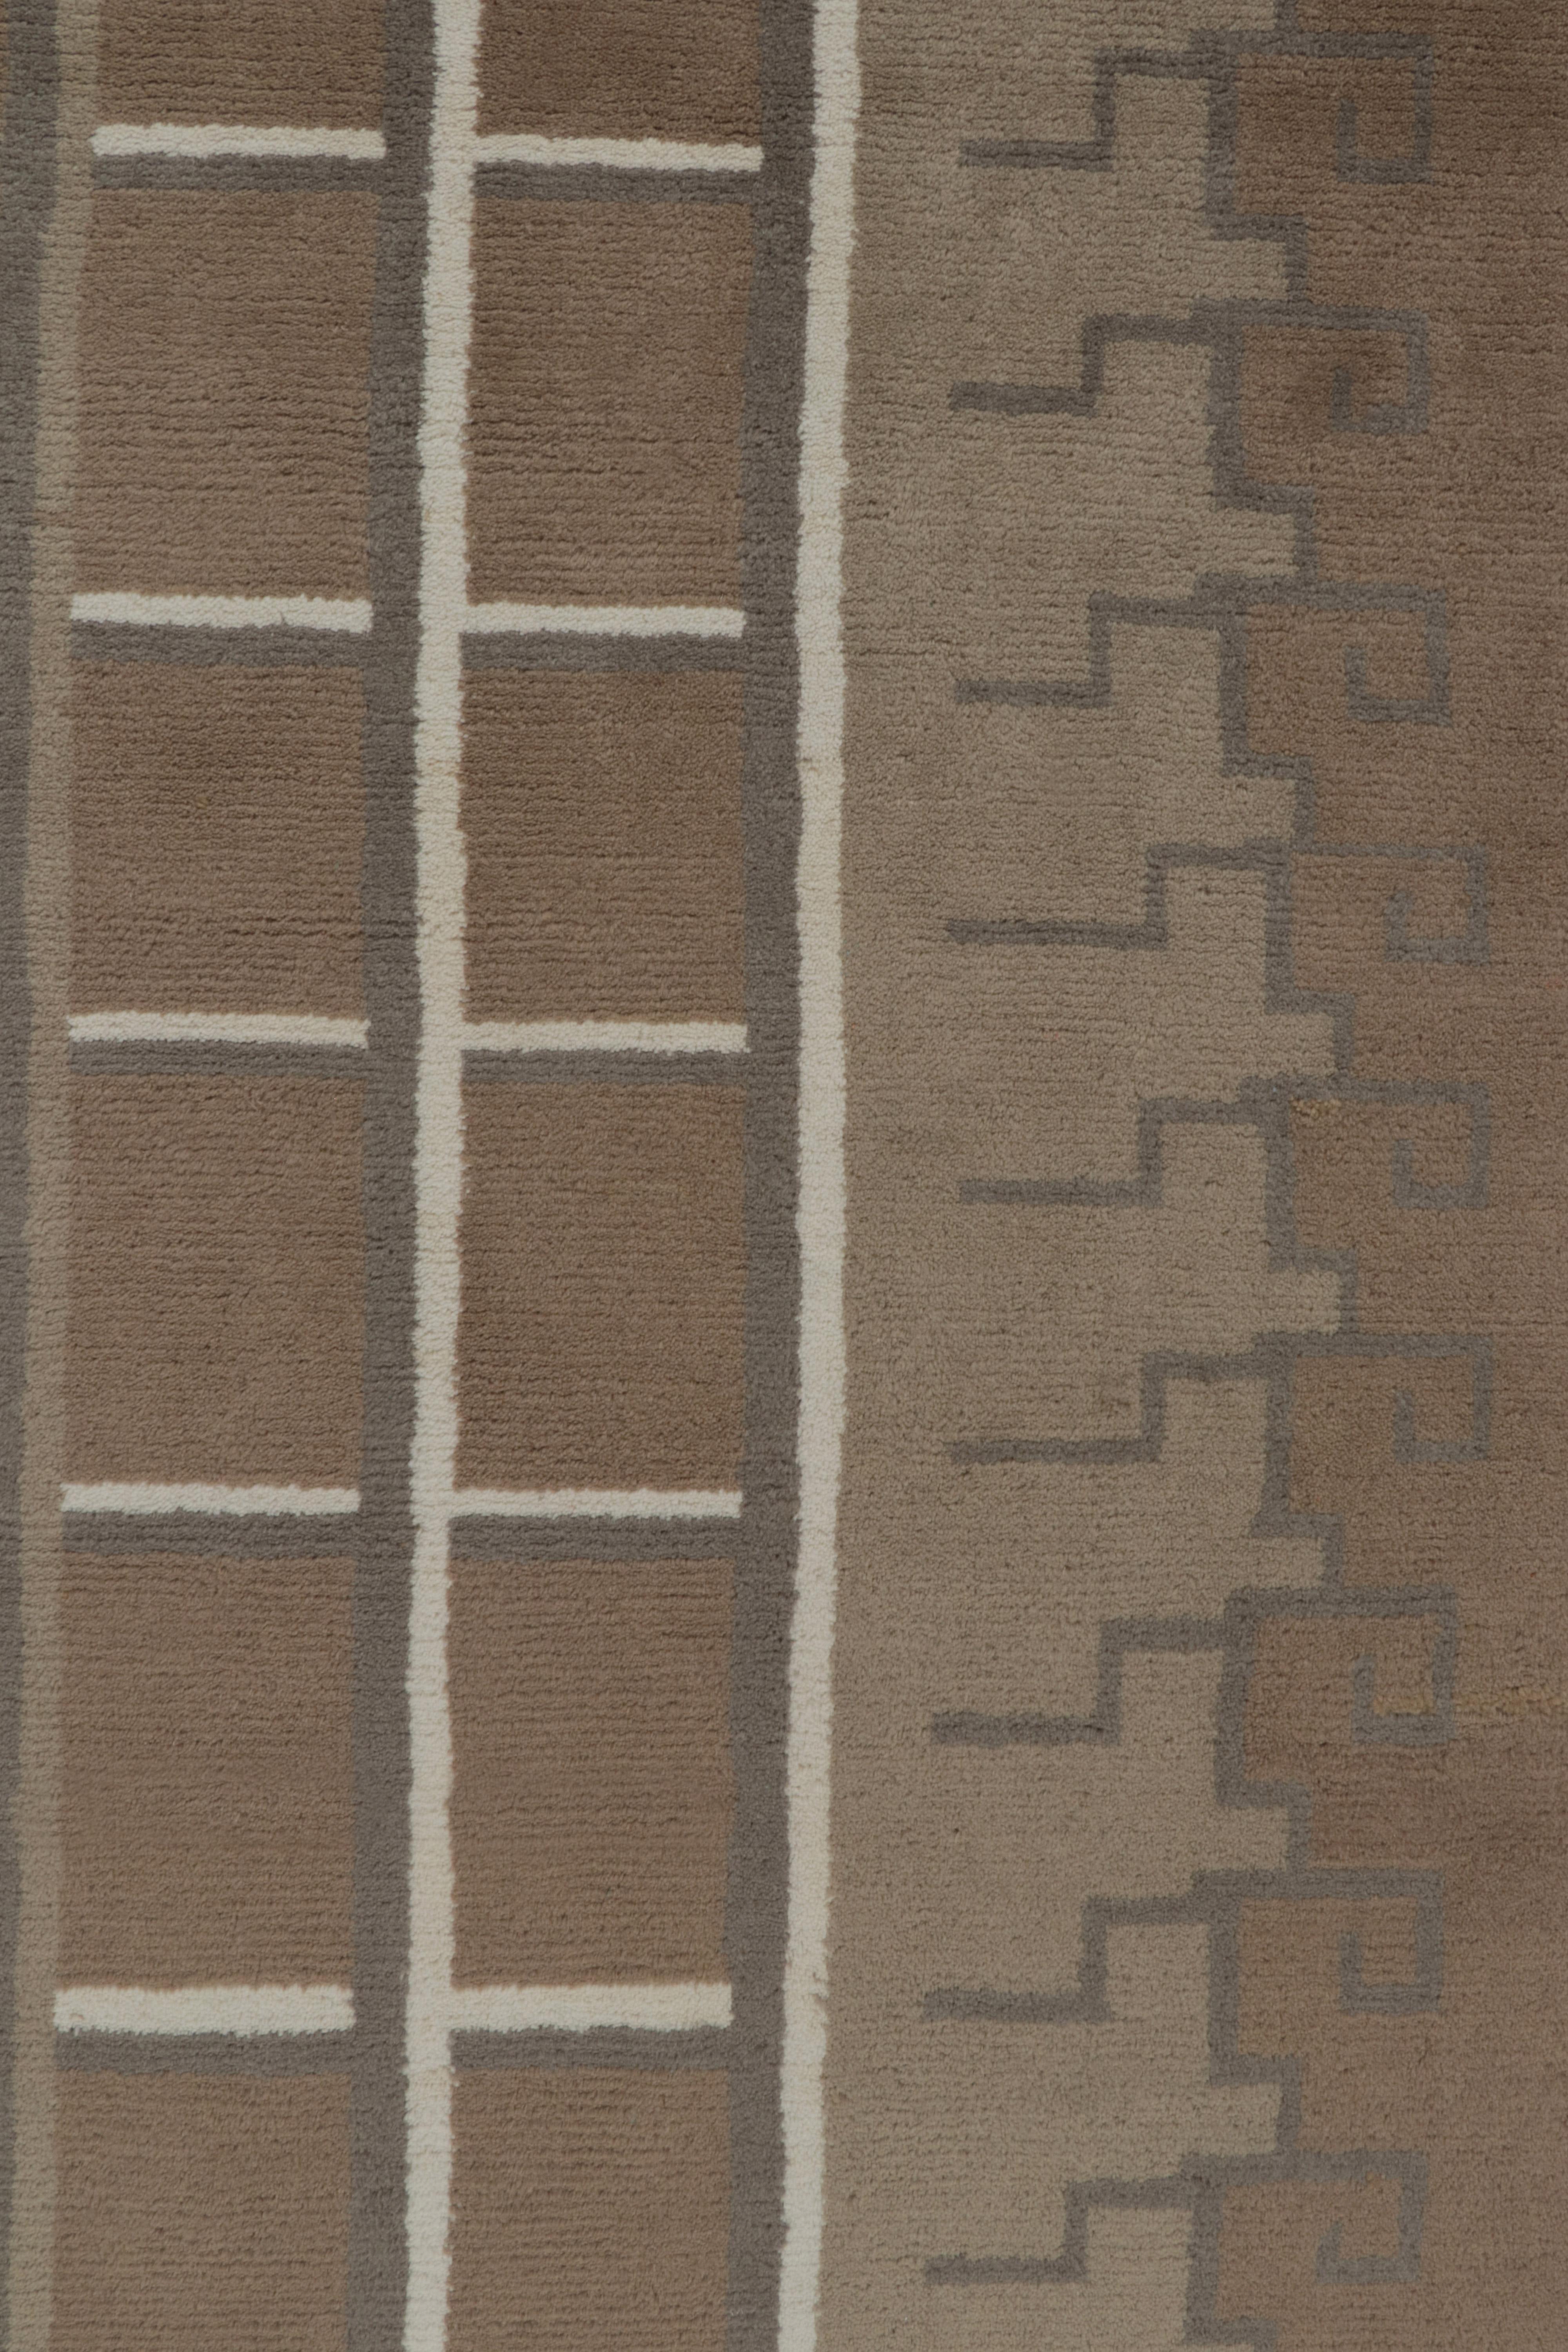 Rug & Kilim’s Swedish Deco style rug in Beige-Brown and Gray Geometric Patterns In New Condition For Sale In Long Island City, NY